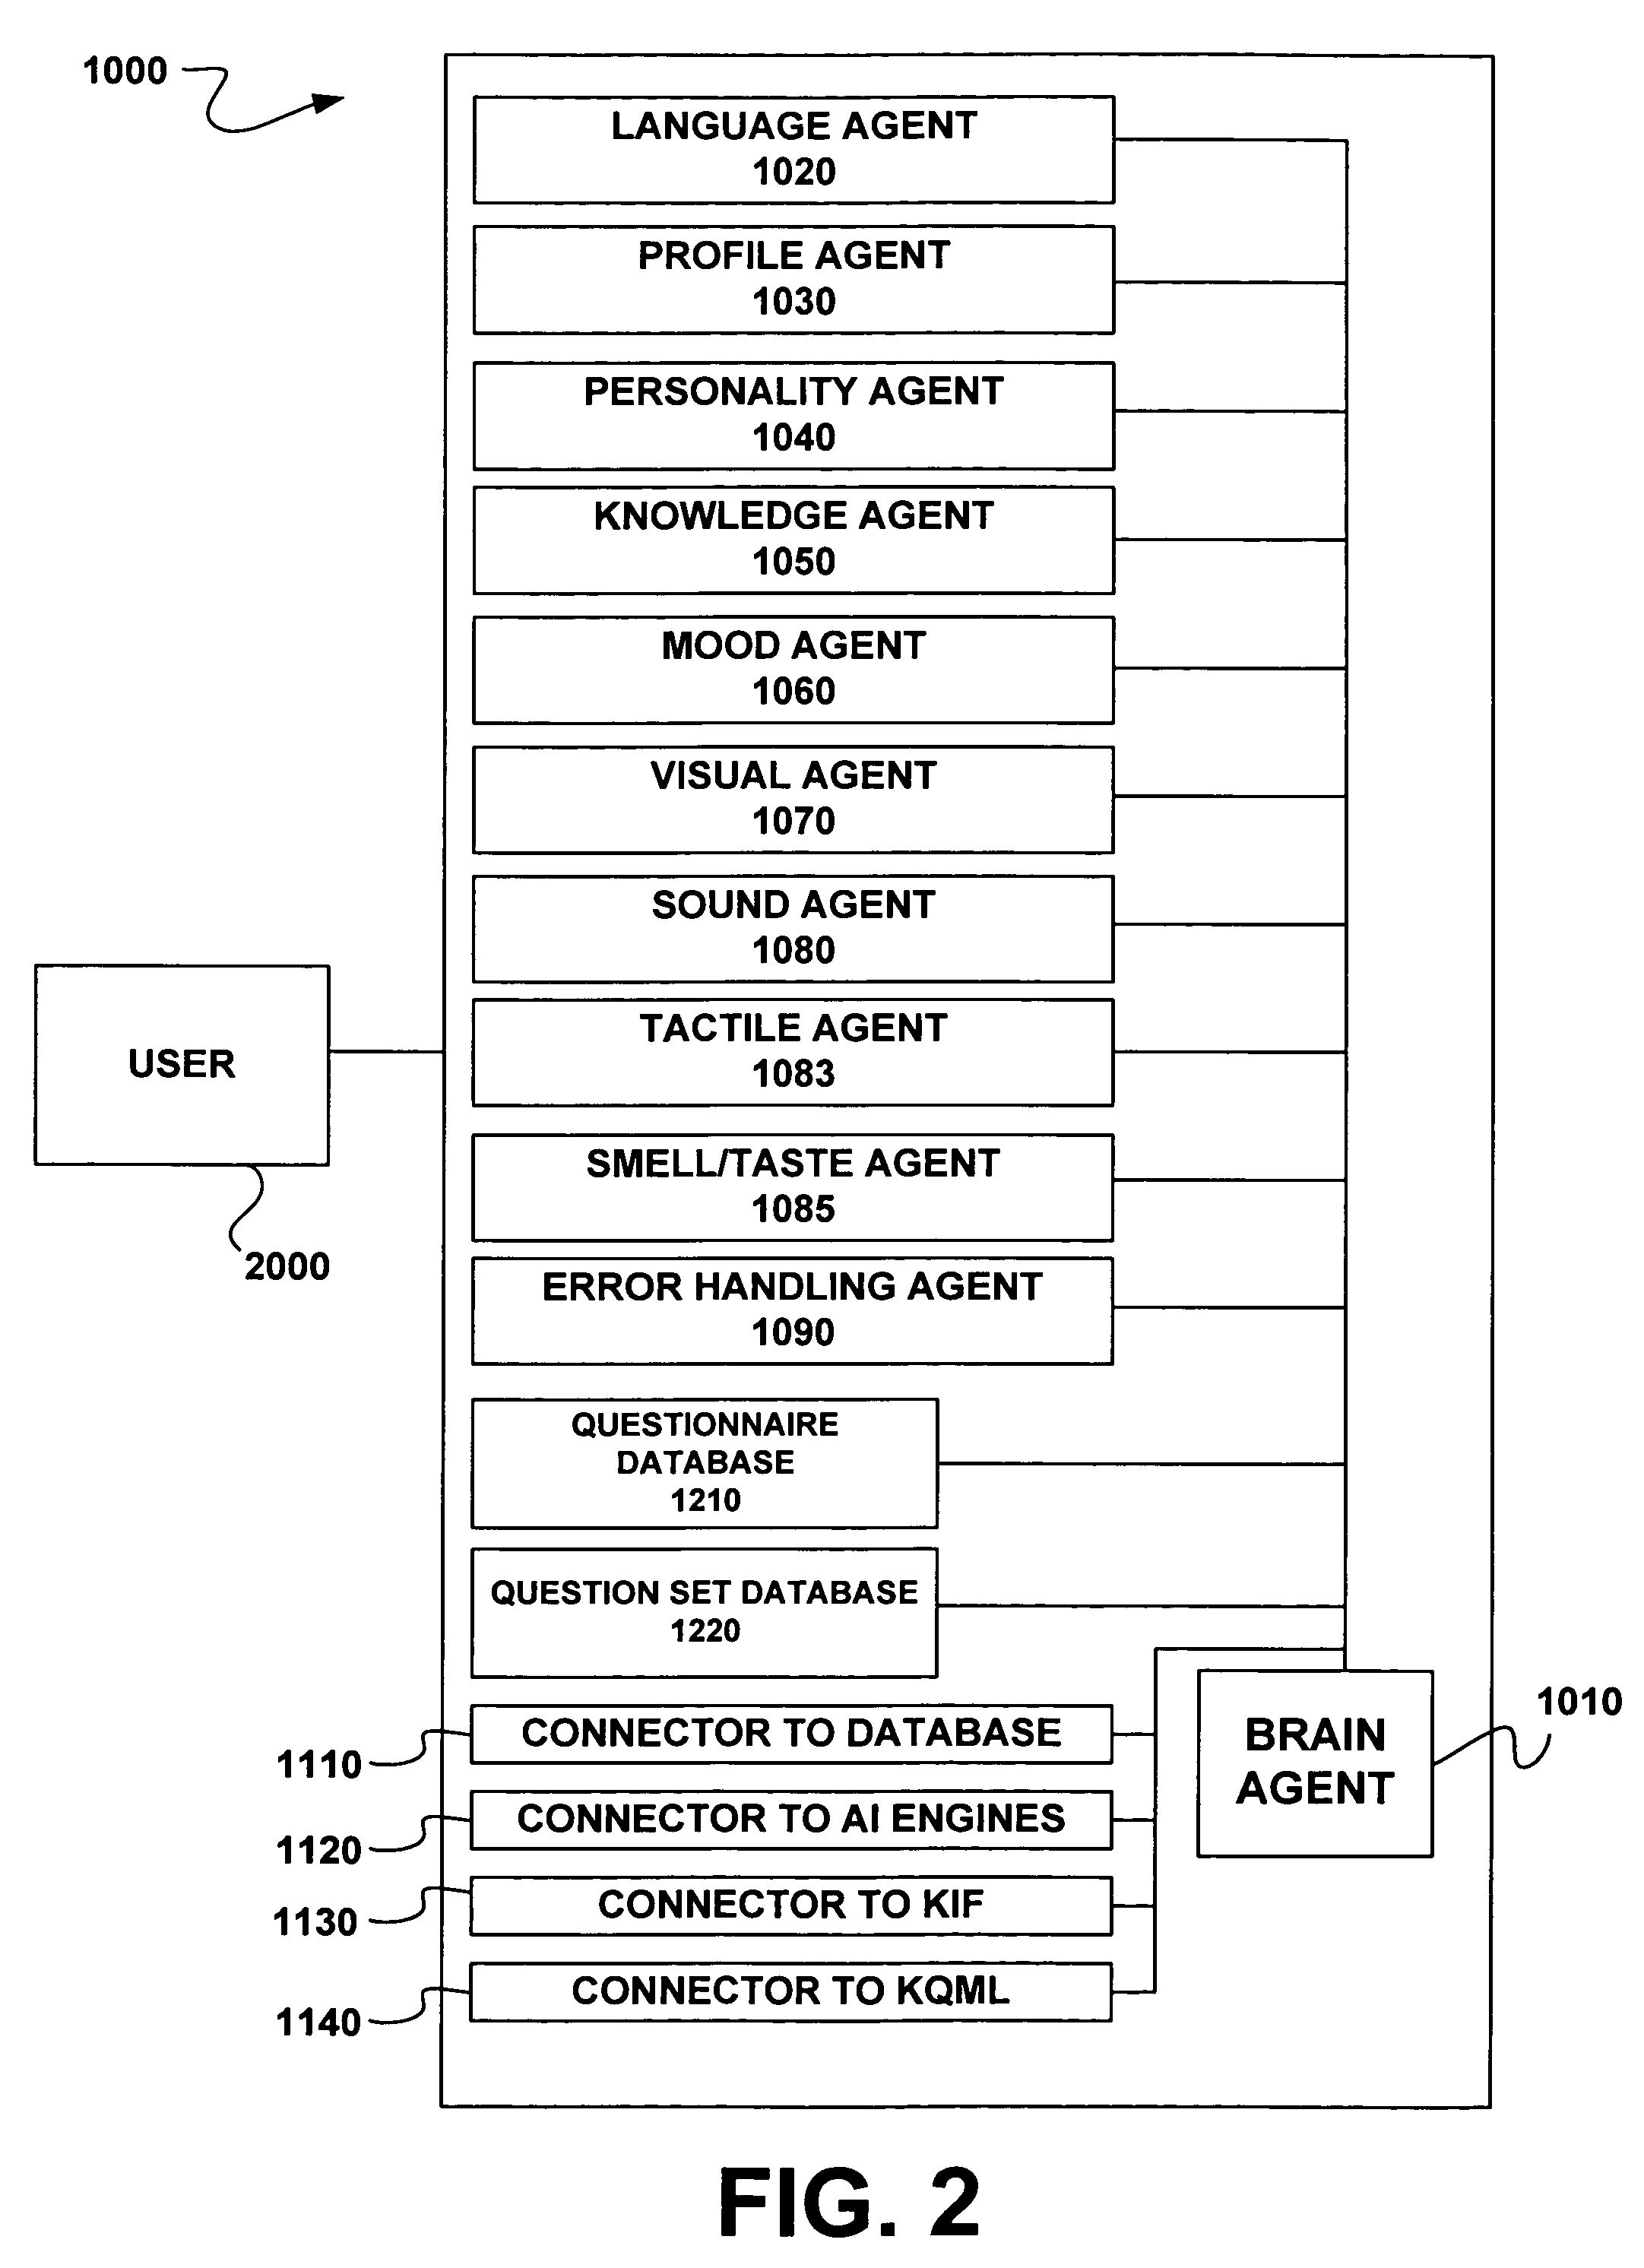 Apparatus and method for problem solving using intelligent agents